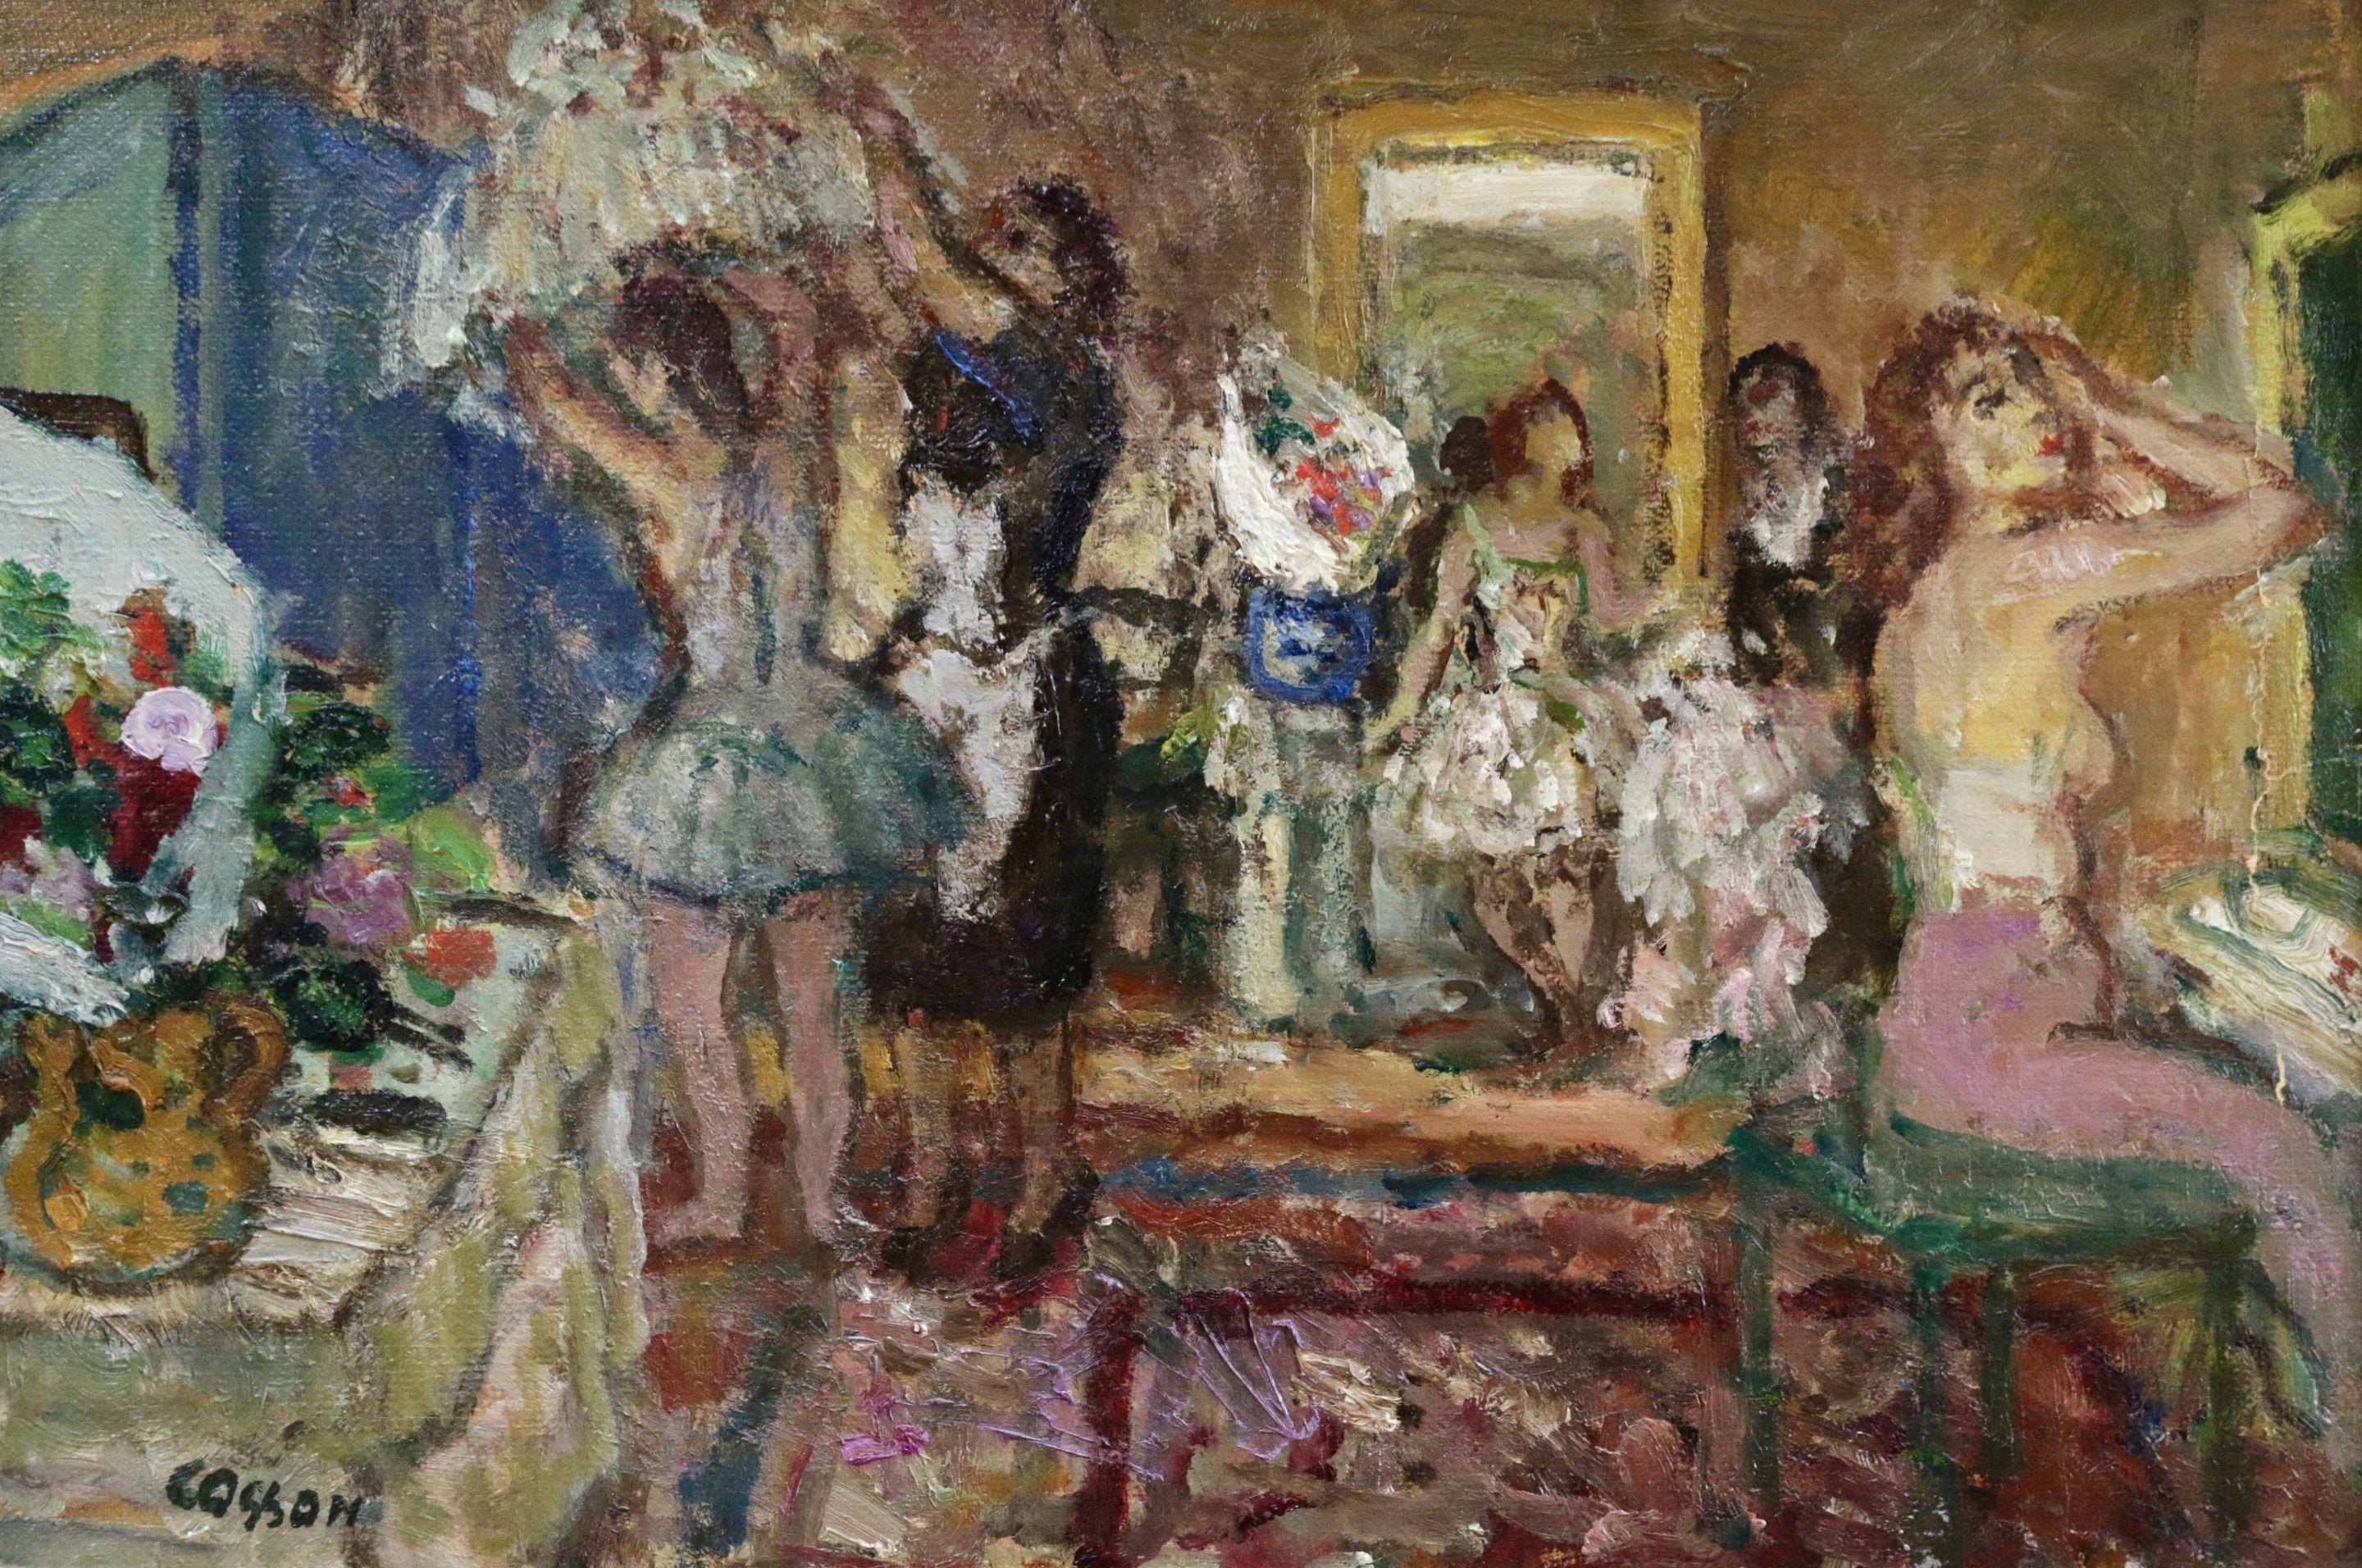 Dancers in Dressing Room - Mid 20th Century Oil, Figures in Interior by Cosson - Painting by Jean-Louis-Marcel Cosson